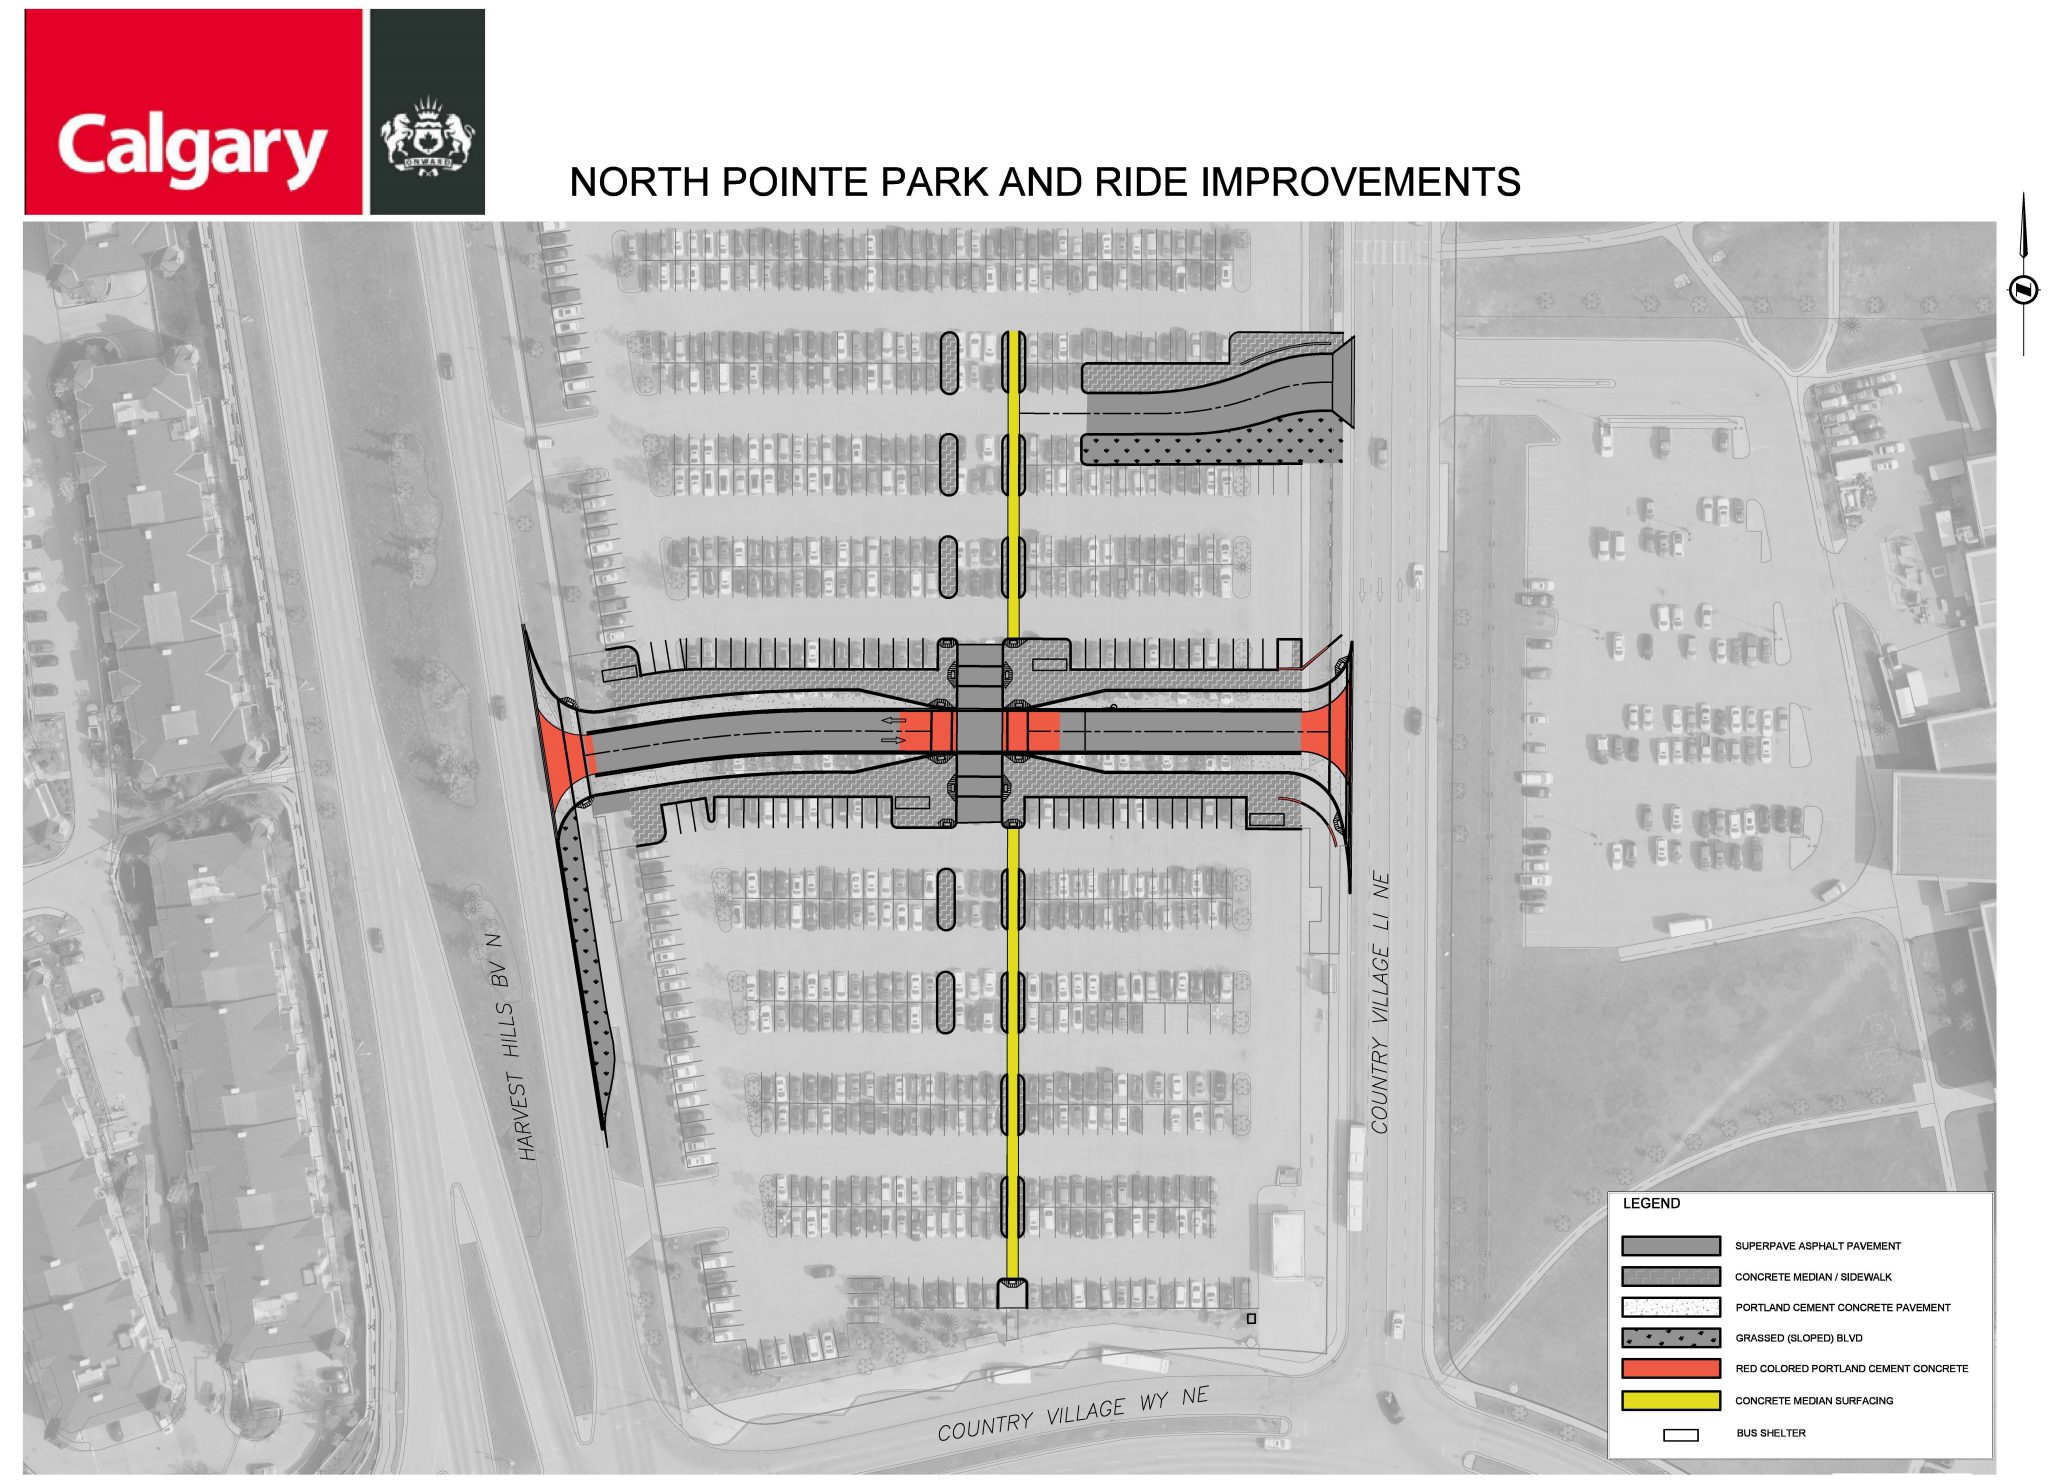 North Pointe Park and Ride Improvements Sketch